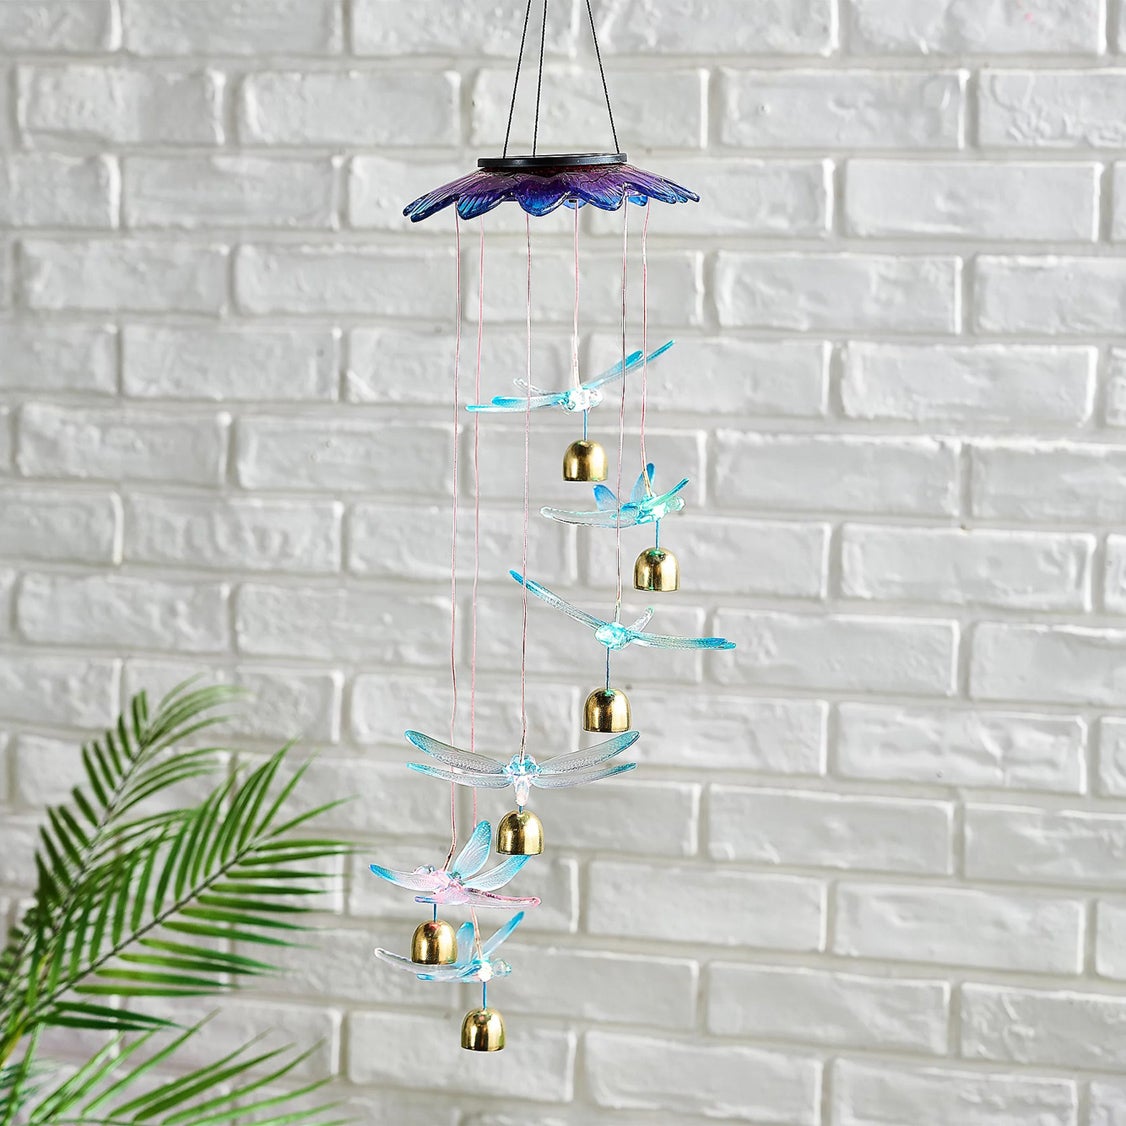 Hanging Solar Dragonfly Mobile with Critters And Chimes